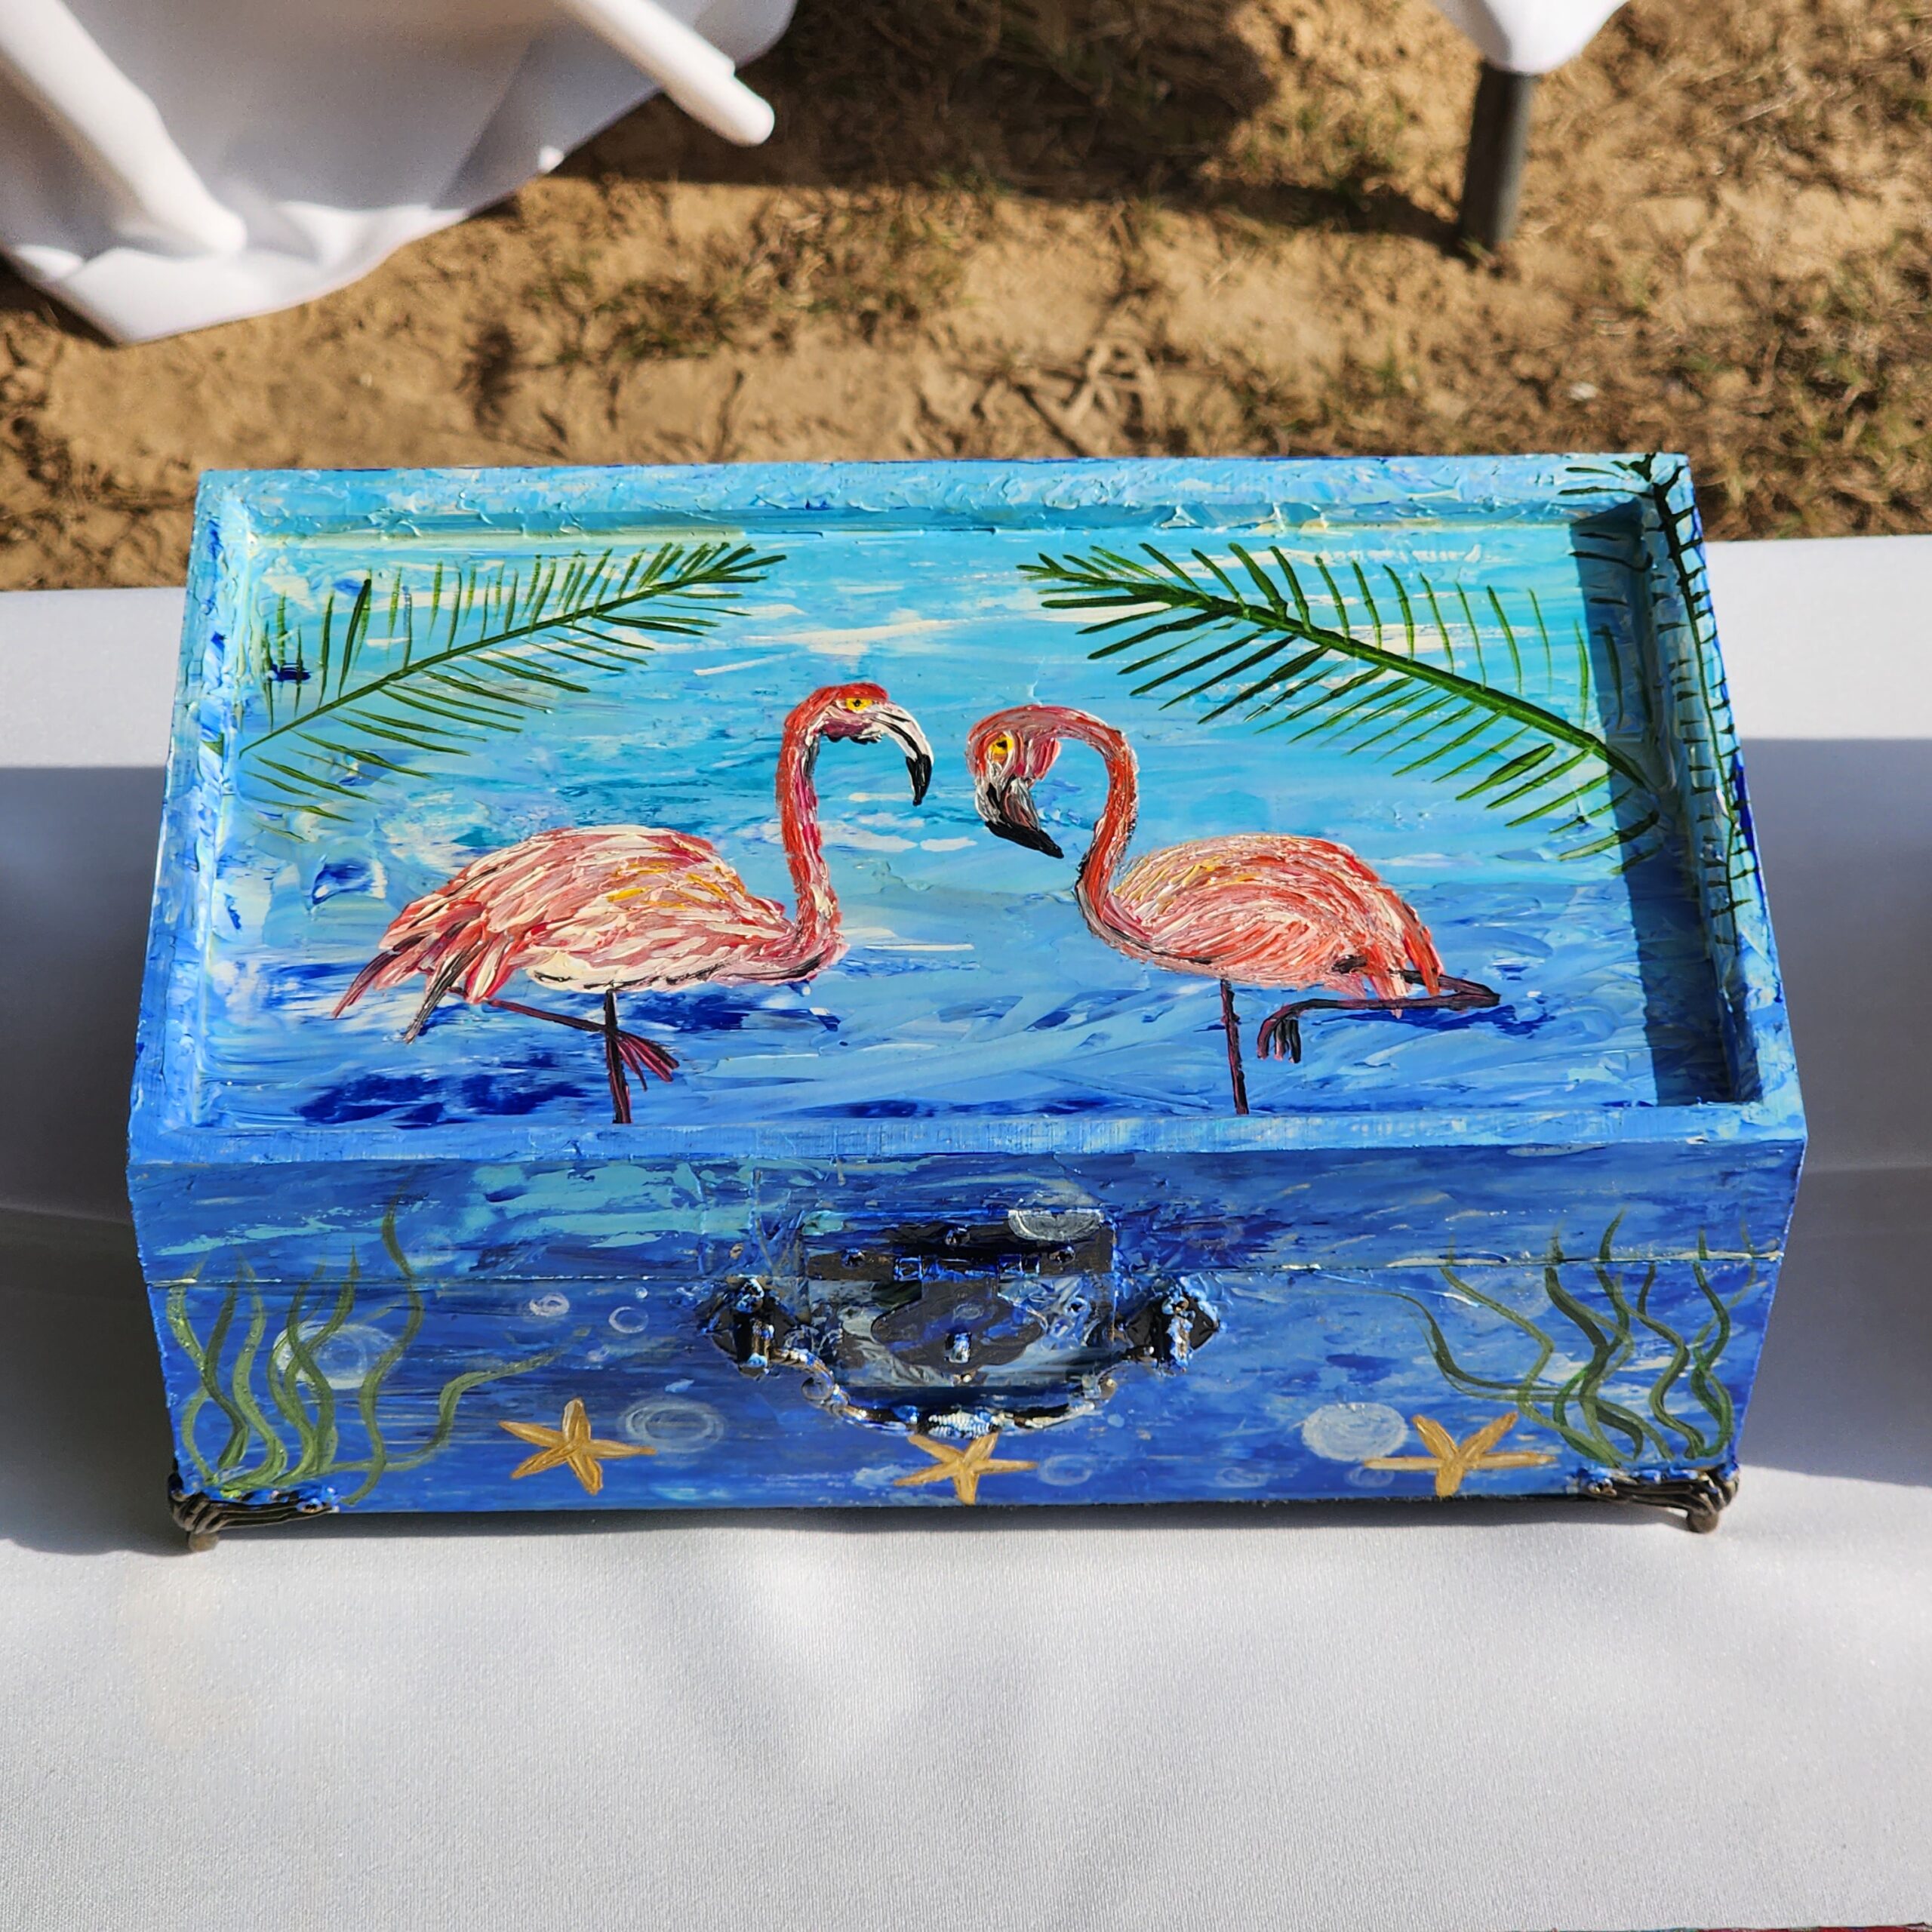 Beautiful handpainted wooden trinket box with a mirror. This cute trinket box is an ideal gift for a special loved one. You can store jewelry such as rings, necklaces, bracelets, or anything you would like to keep in a particular place, especially in this elegant and artistic trinket box.